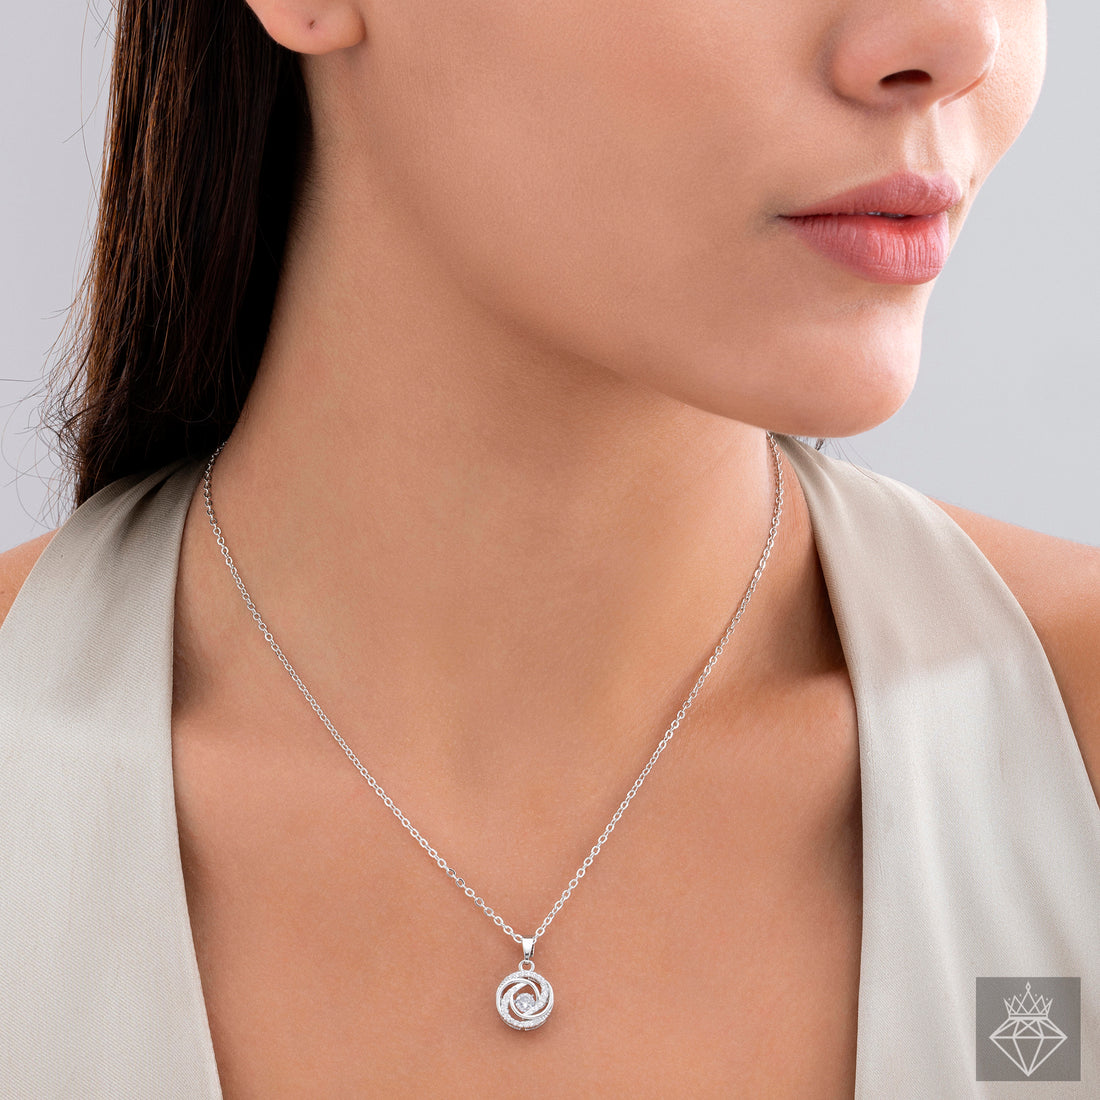 PRAO Opulent Round AD Crystal Pendant Necklace